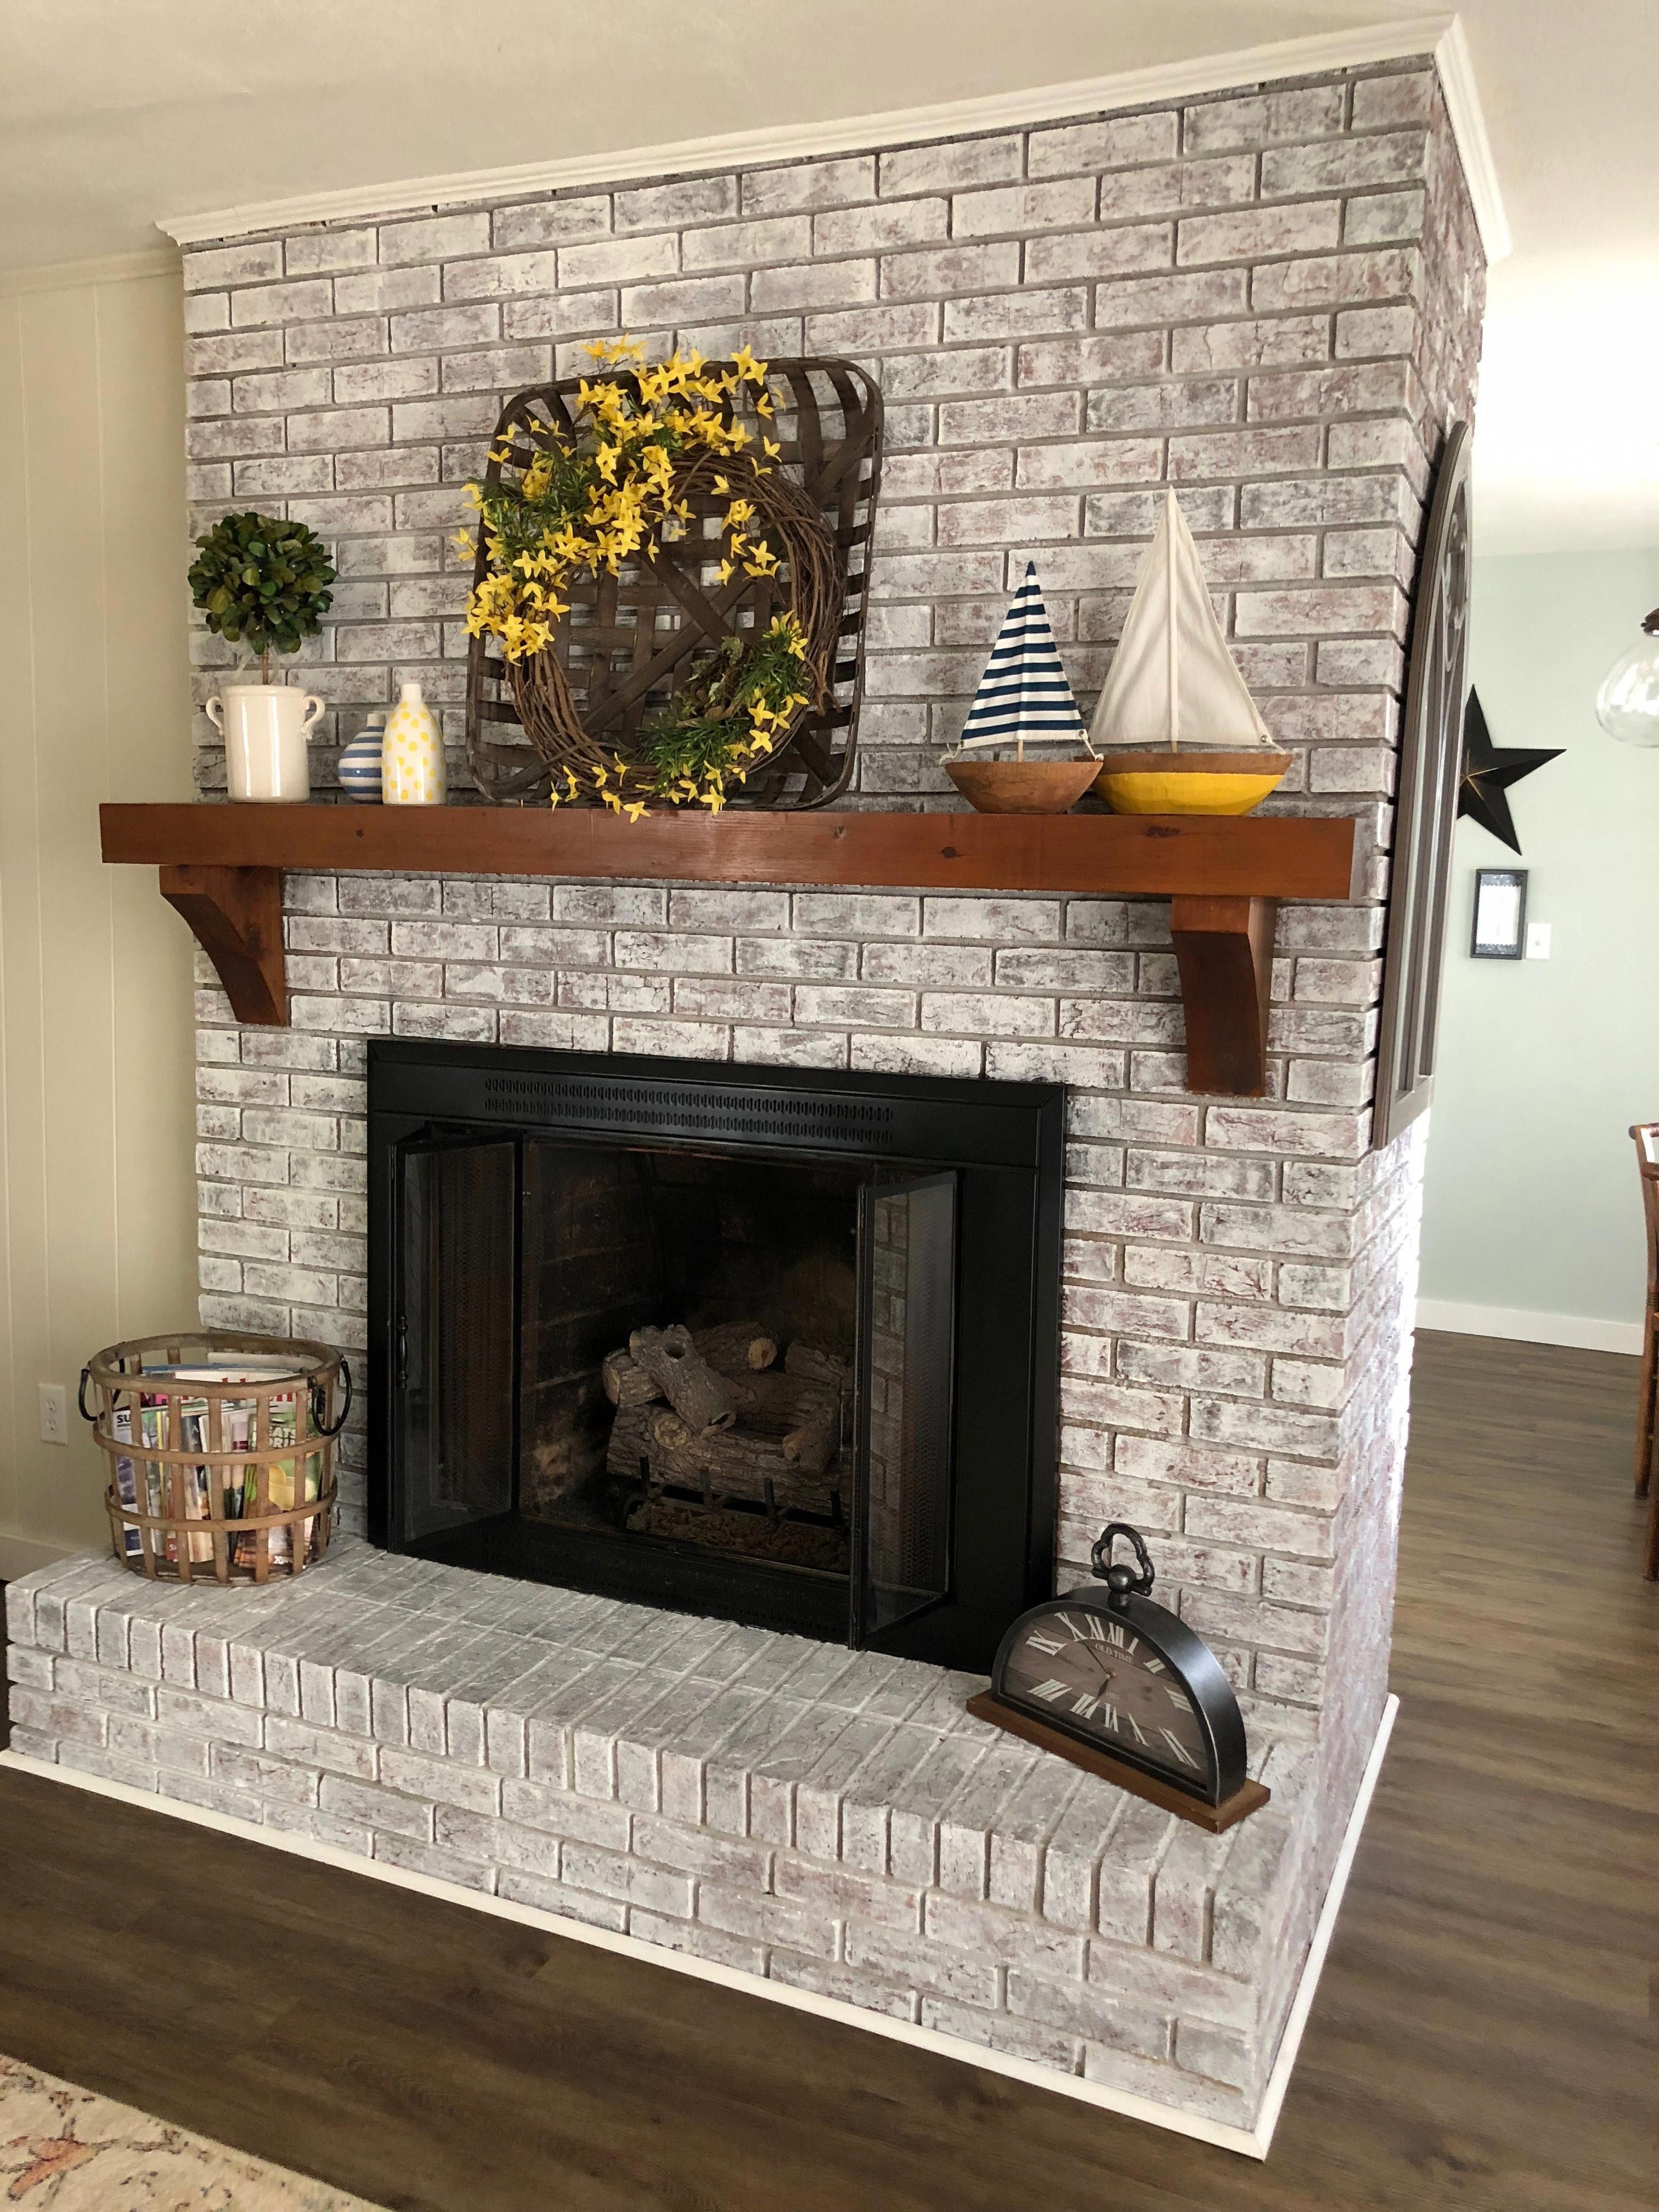 Brick Fireplace Makeover Unique Painted Brick Fireplace Sw Pure White Over Dark Red Brick